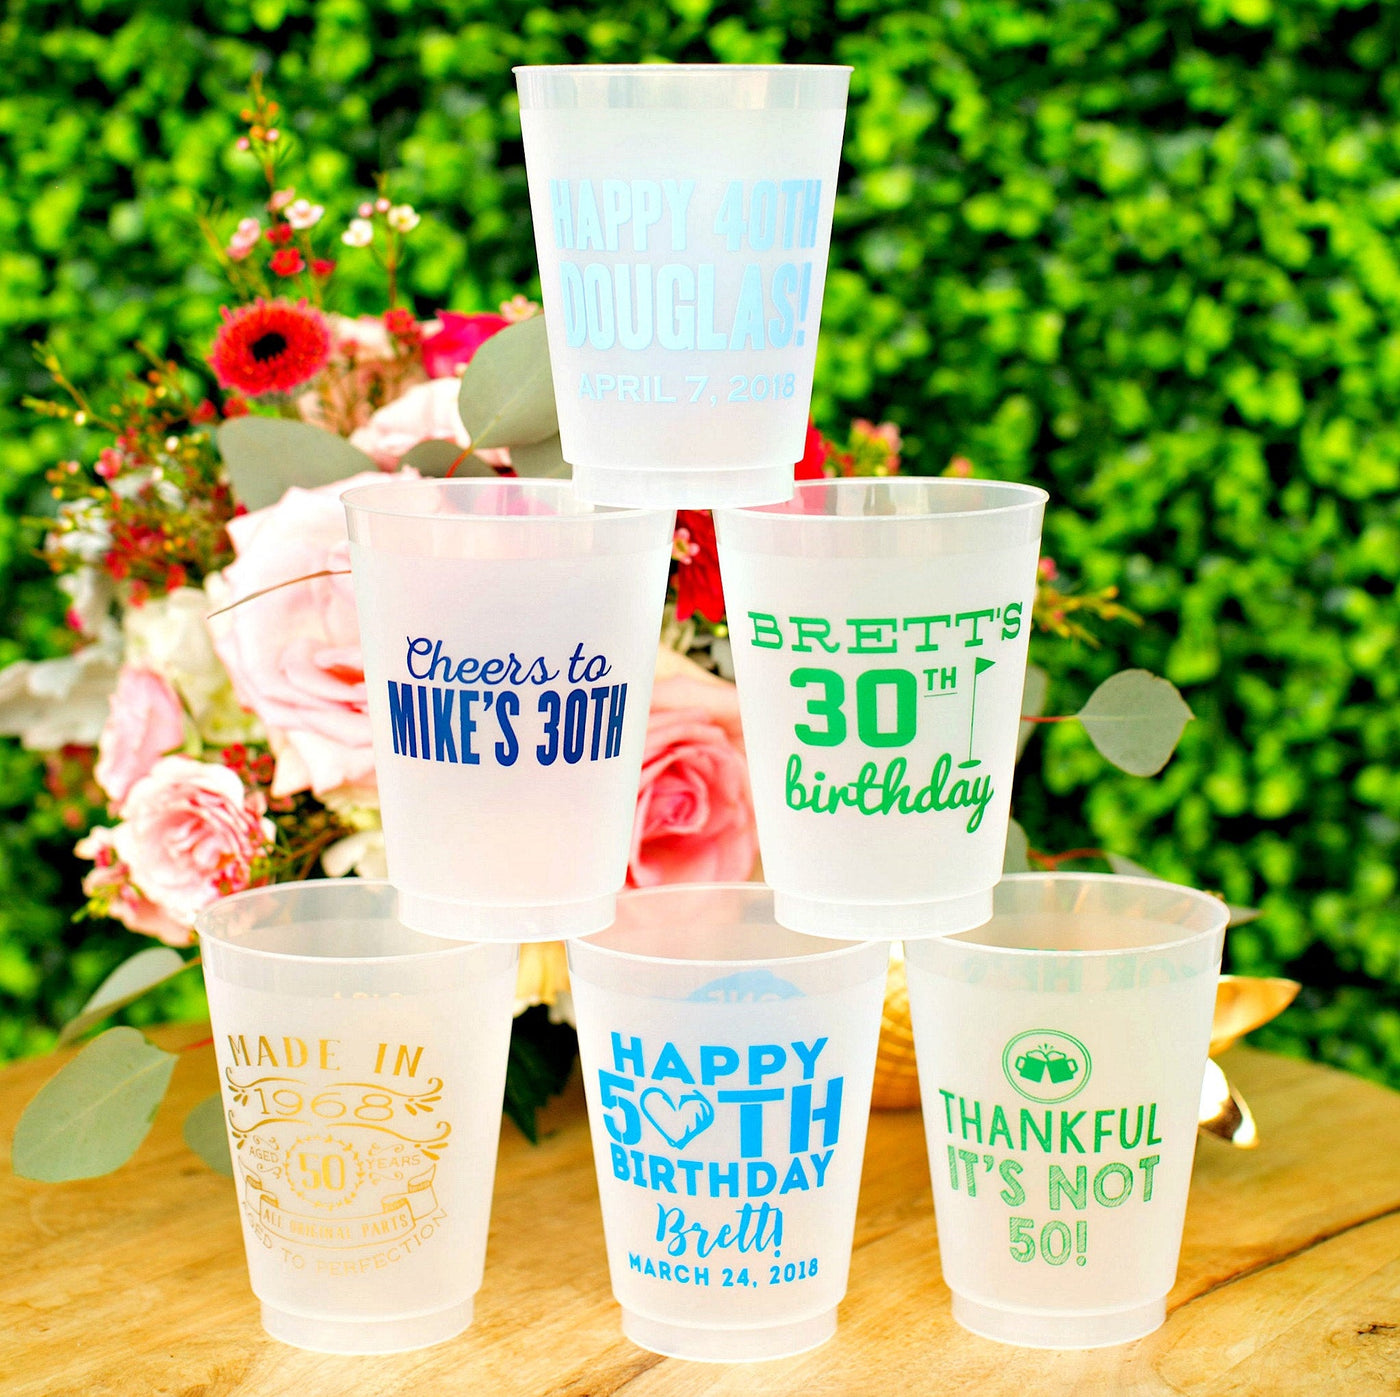 First Birthday Cups, First Birthday Party Cups, Personalized Cups